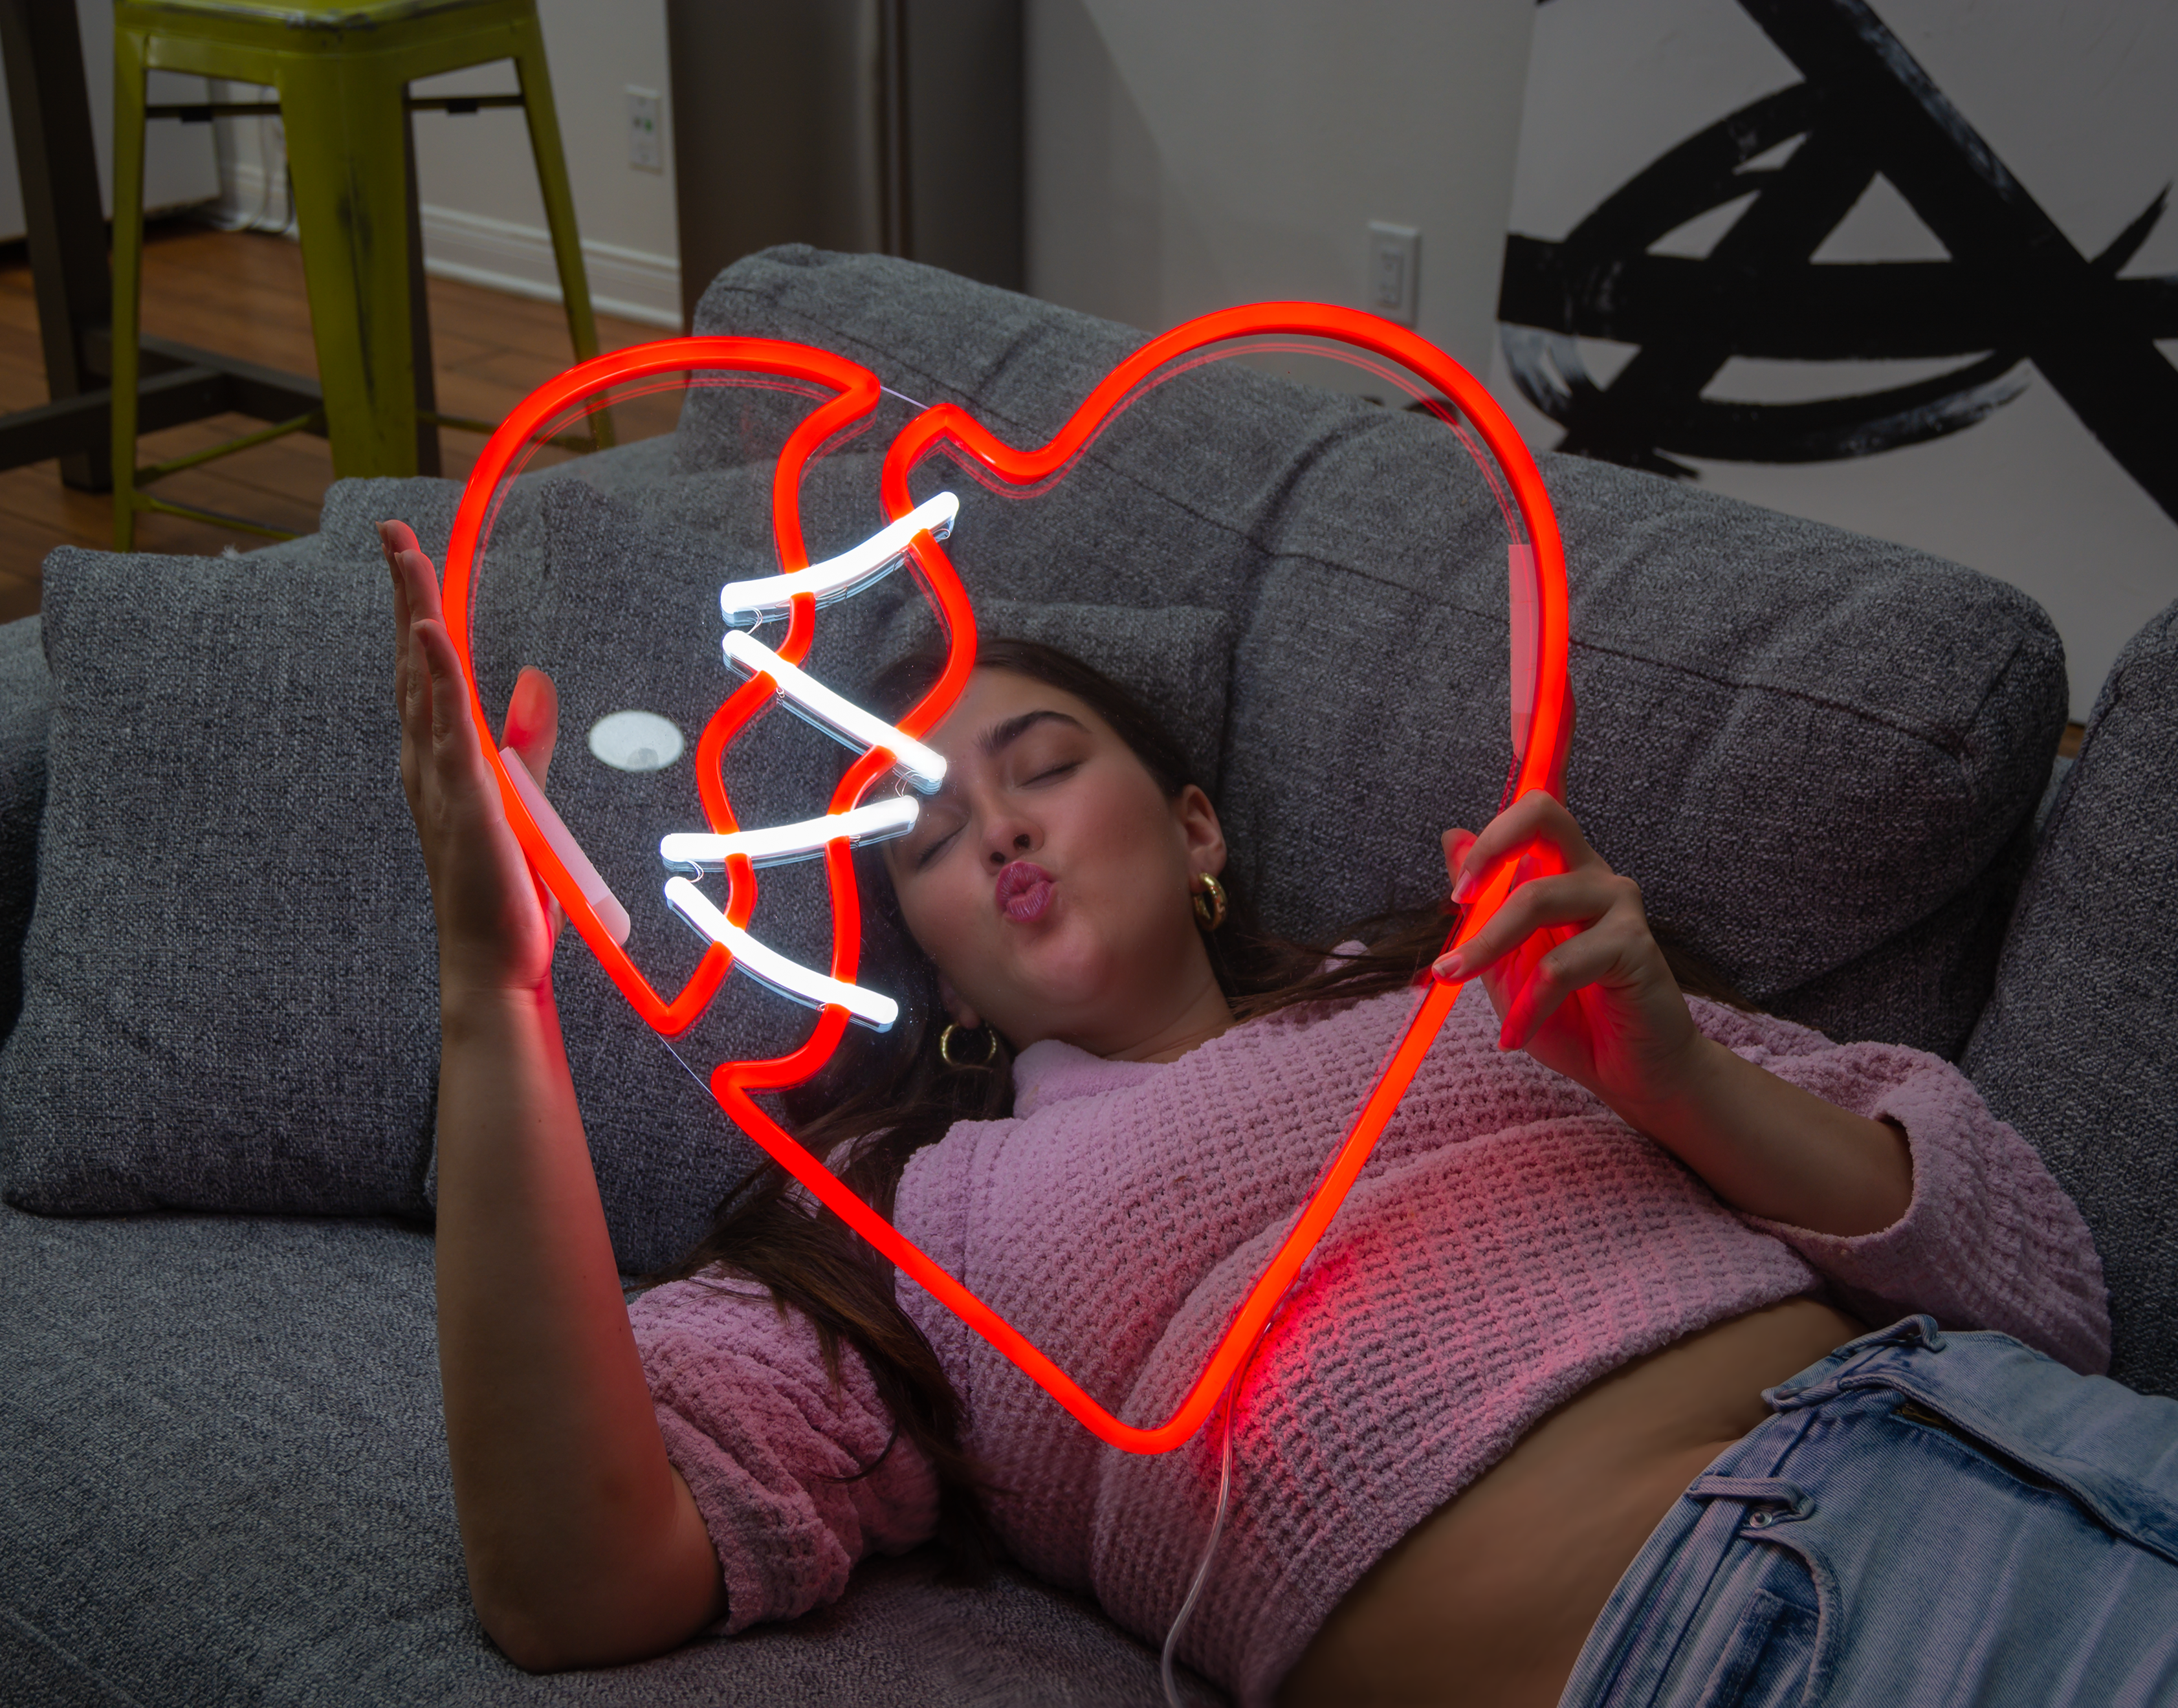 A woman holding a red neon sign of a broken heart.